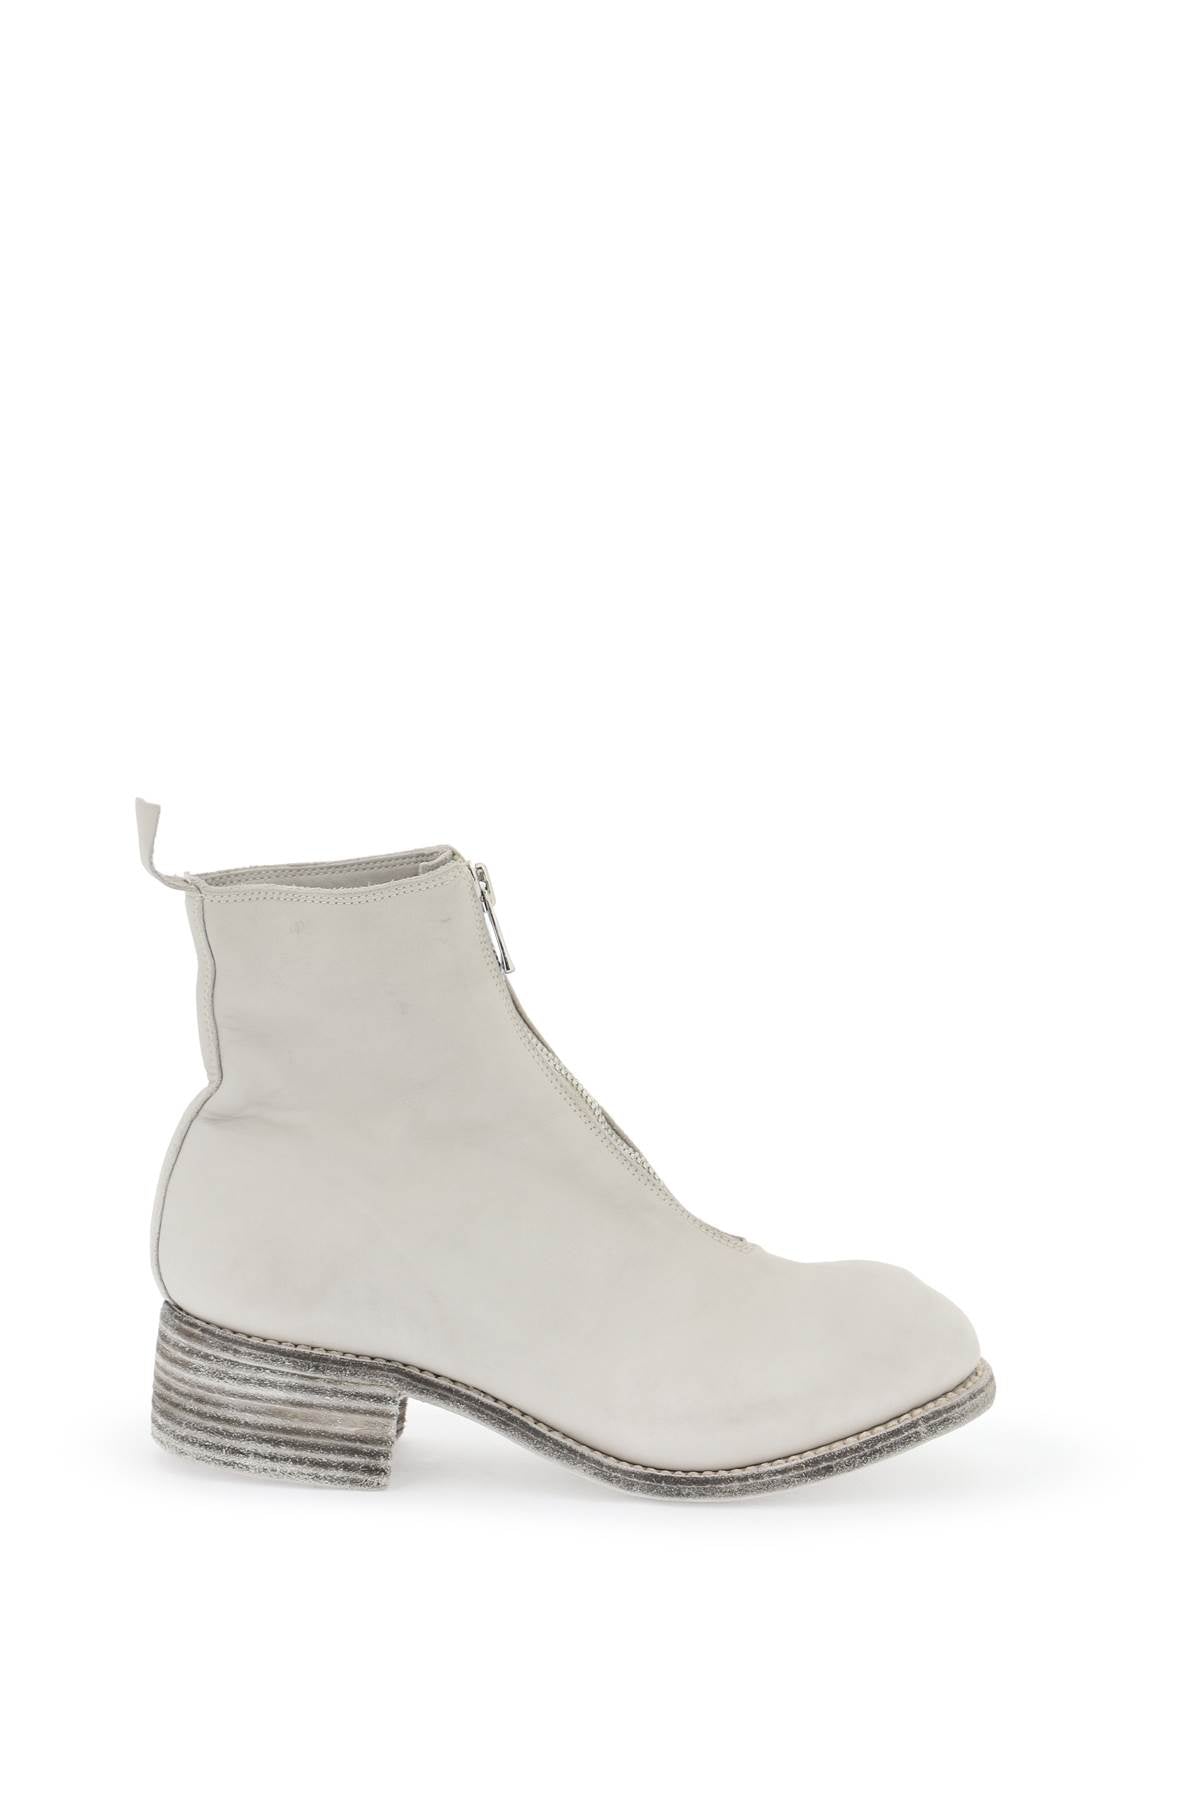 front zip leather ankle boots-0